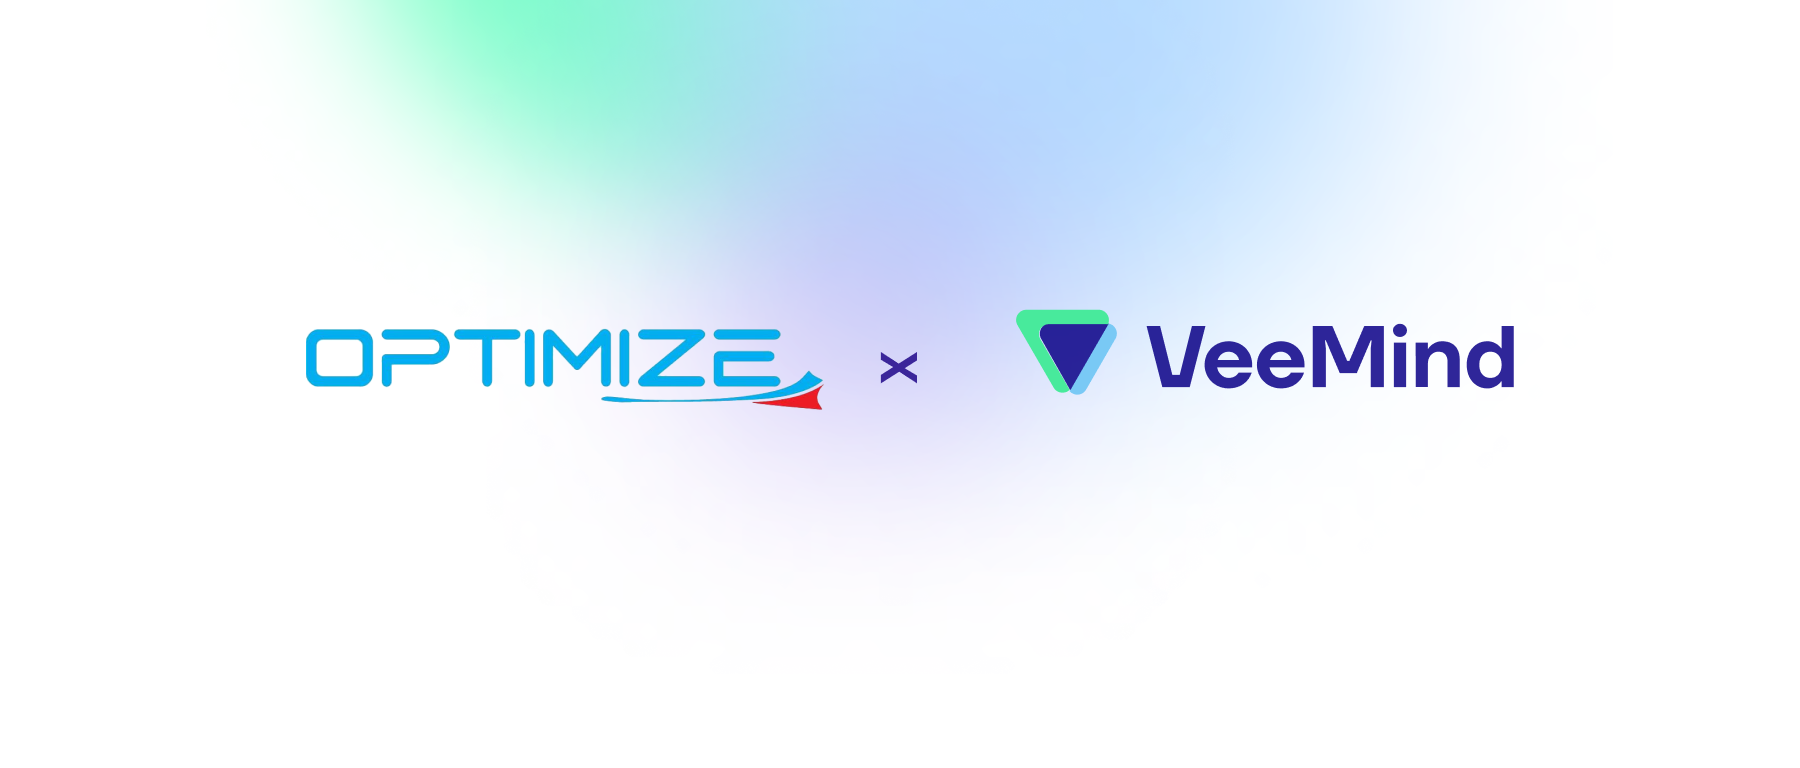 Optimize Courier enhanced leadership capabilities and increased employee engagement with VeeMind